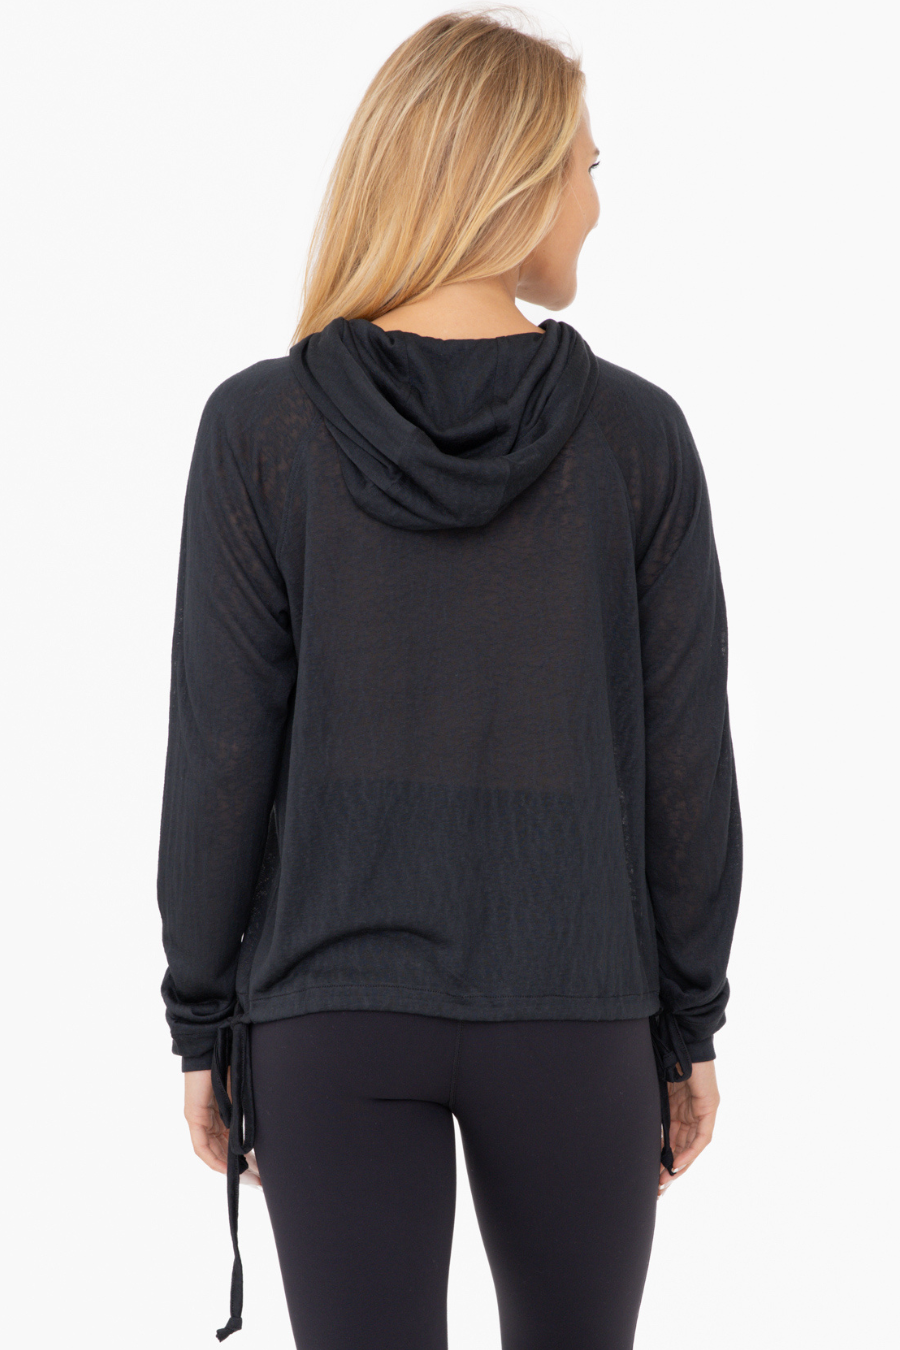 back view of the hood on the Noelle top in the color black